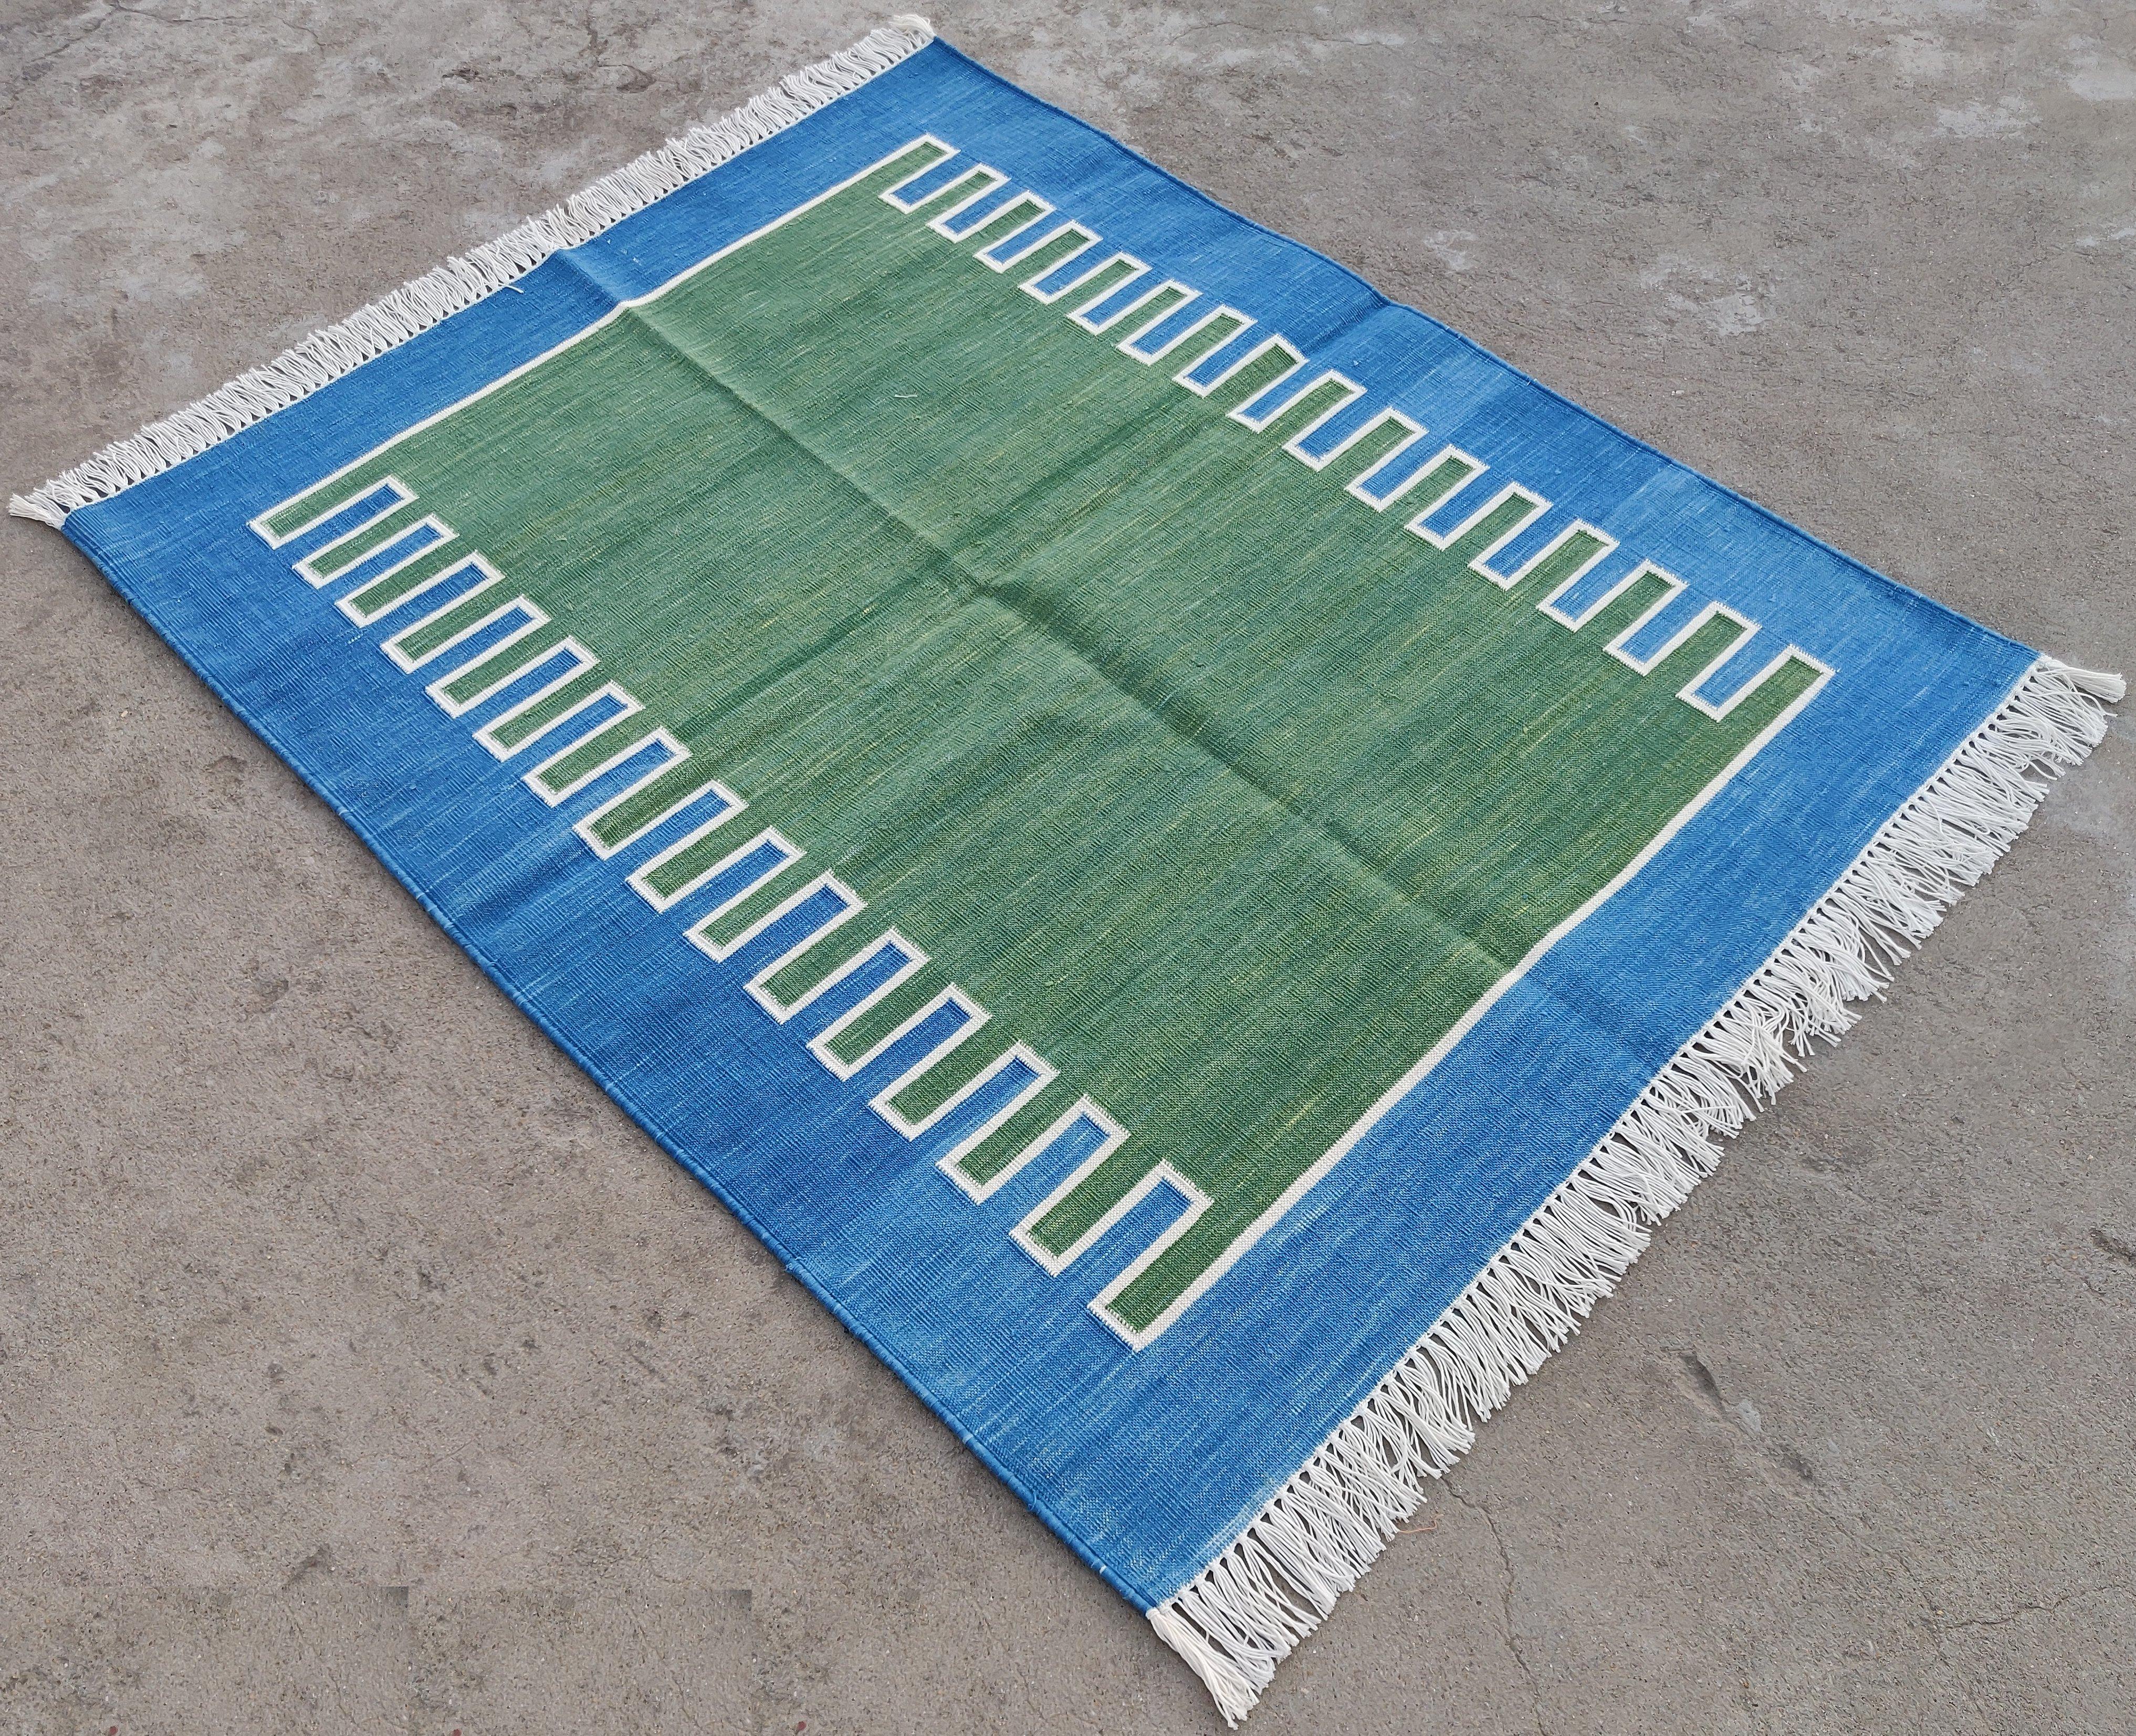 Cotton Vegetable Dyed Forest Green, Cream And Blue Zig Zag Striped Indian Dhurrie Rug-3'x5' 
These special flat-weave dhurries are hand-woven with 15 ply 100% cotton yarn. Due to the special manufacturing techniques used to create our rugs, the size